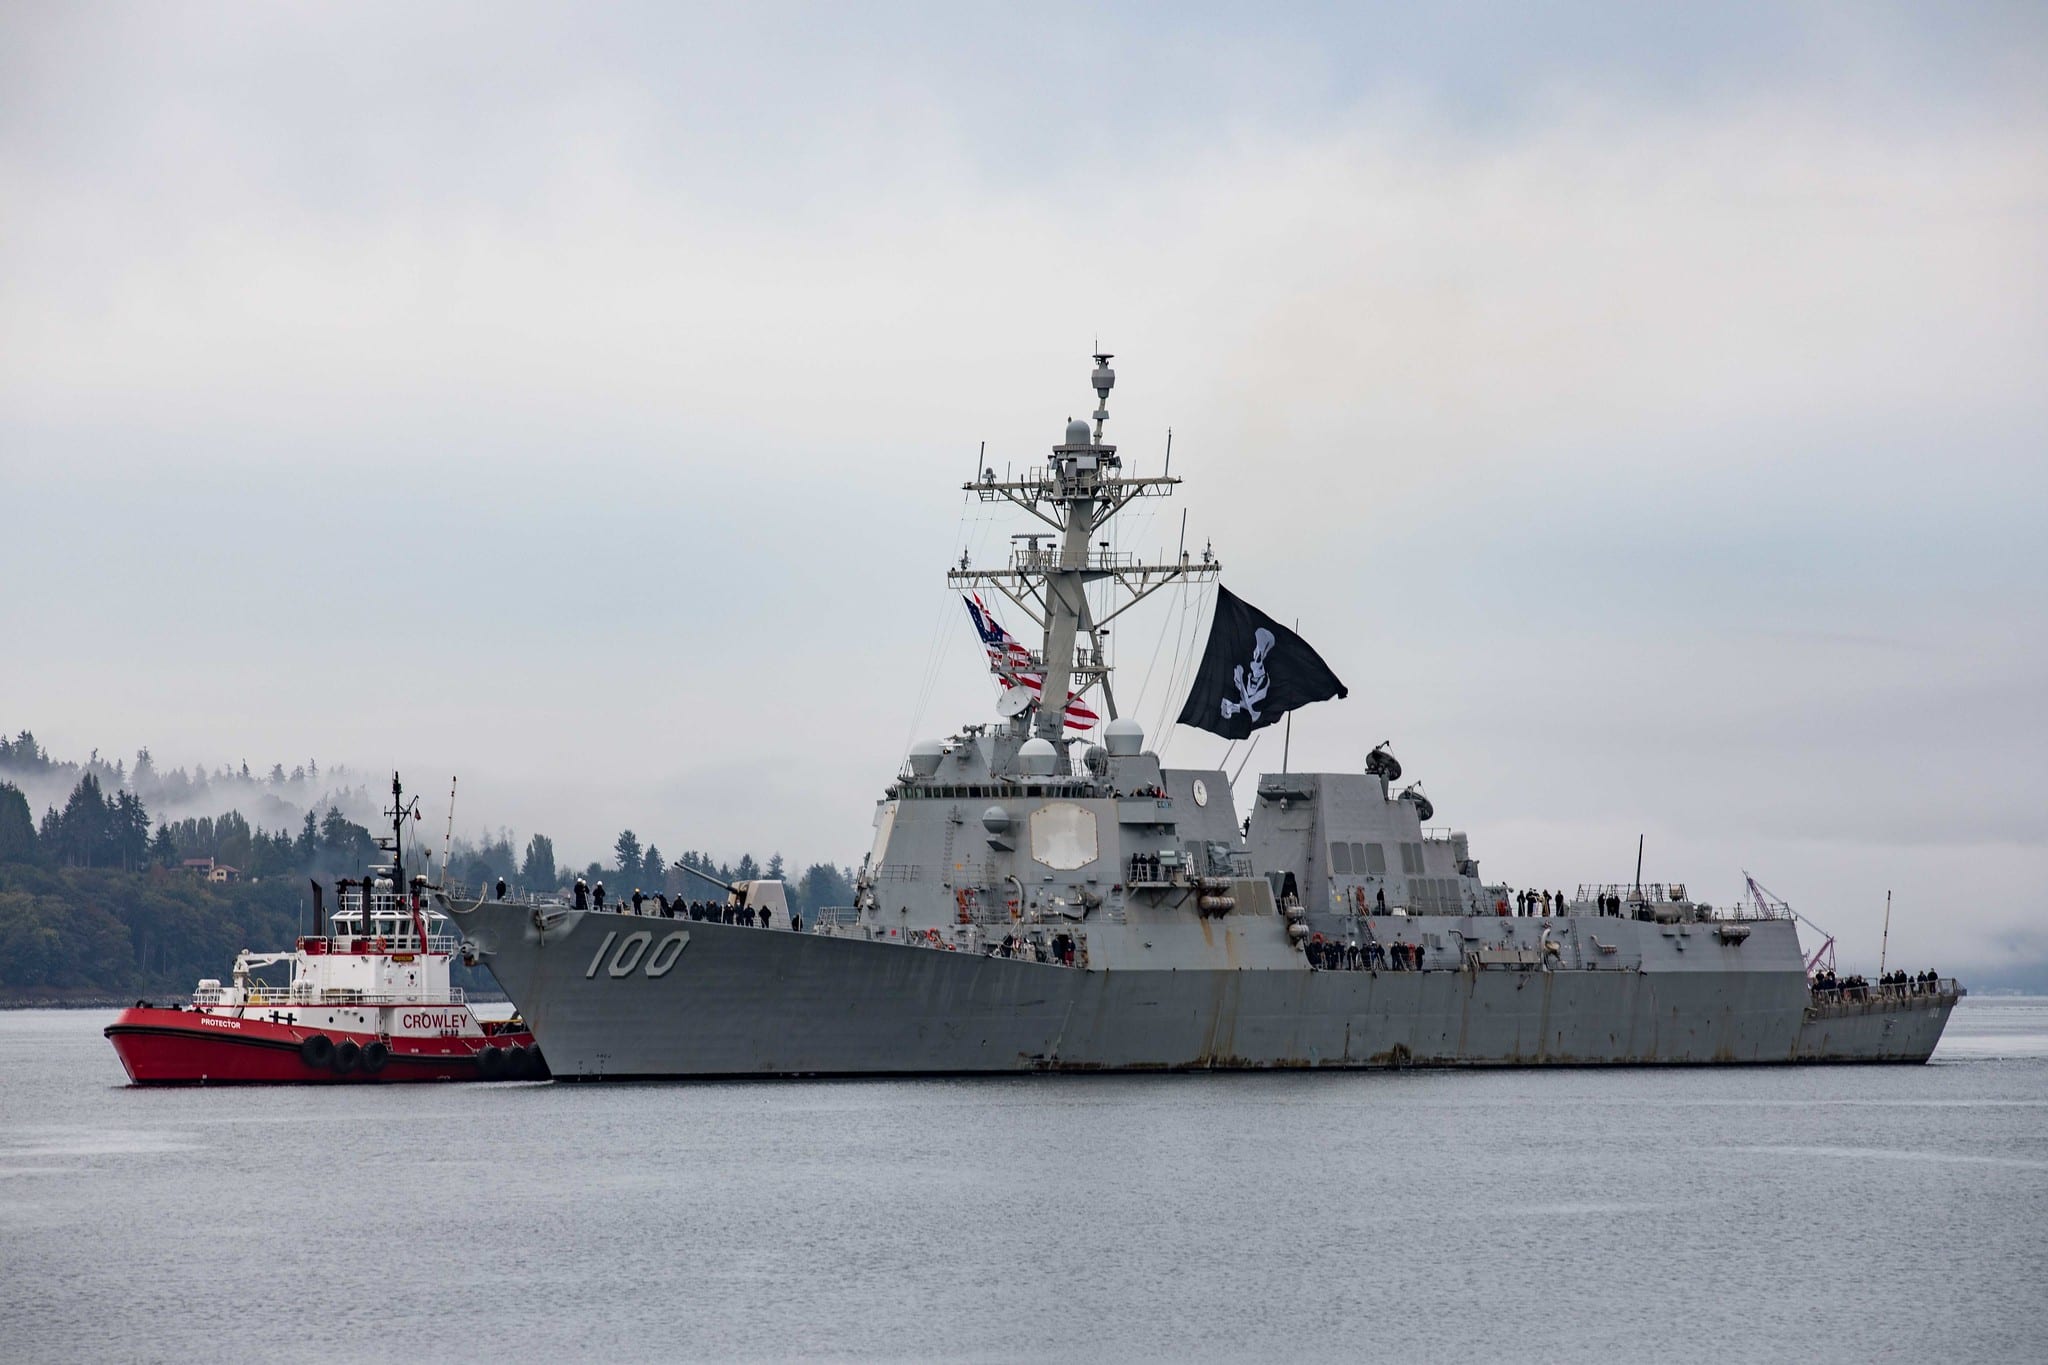 The guided-missile destroyer USS Kidd (DDG 100) arrives in Washington flying the "Jolly Roger"